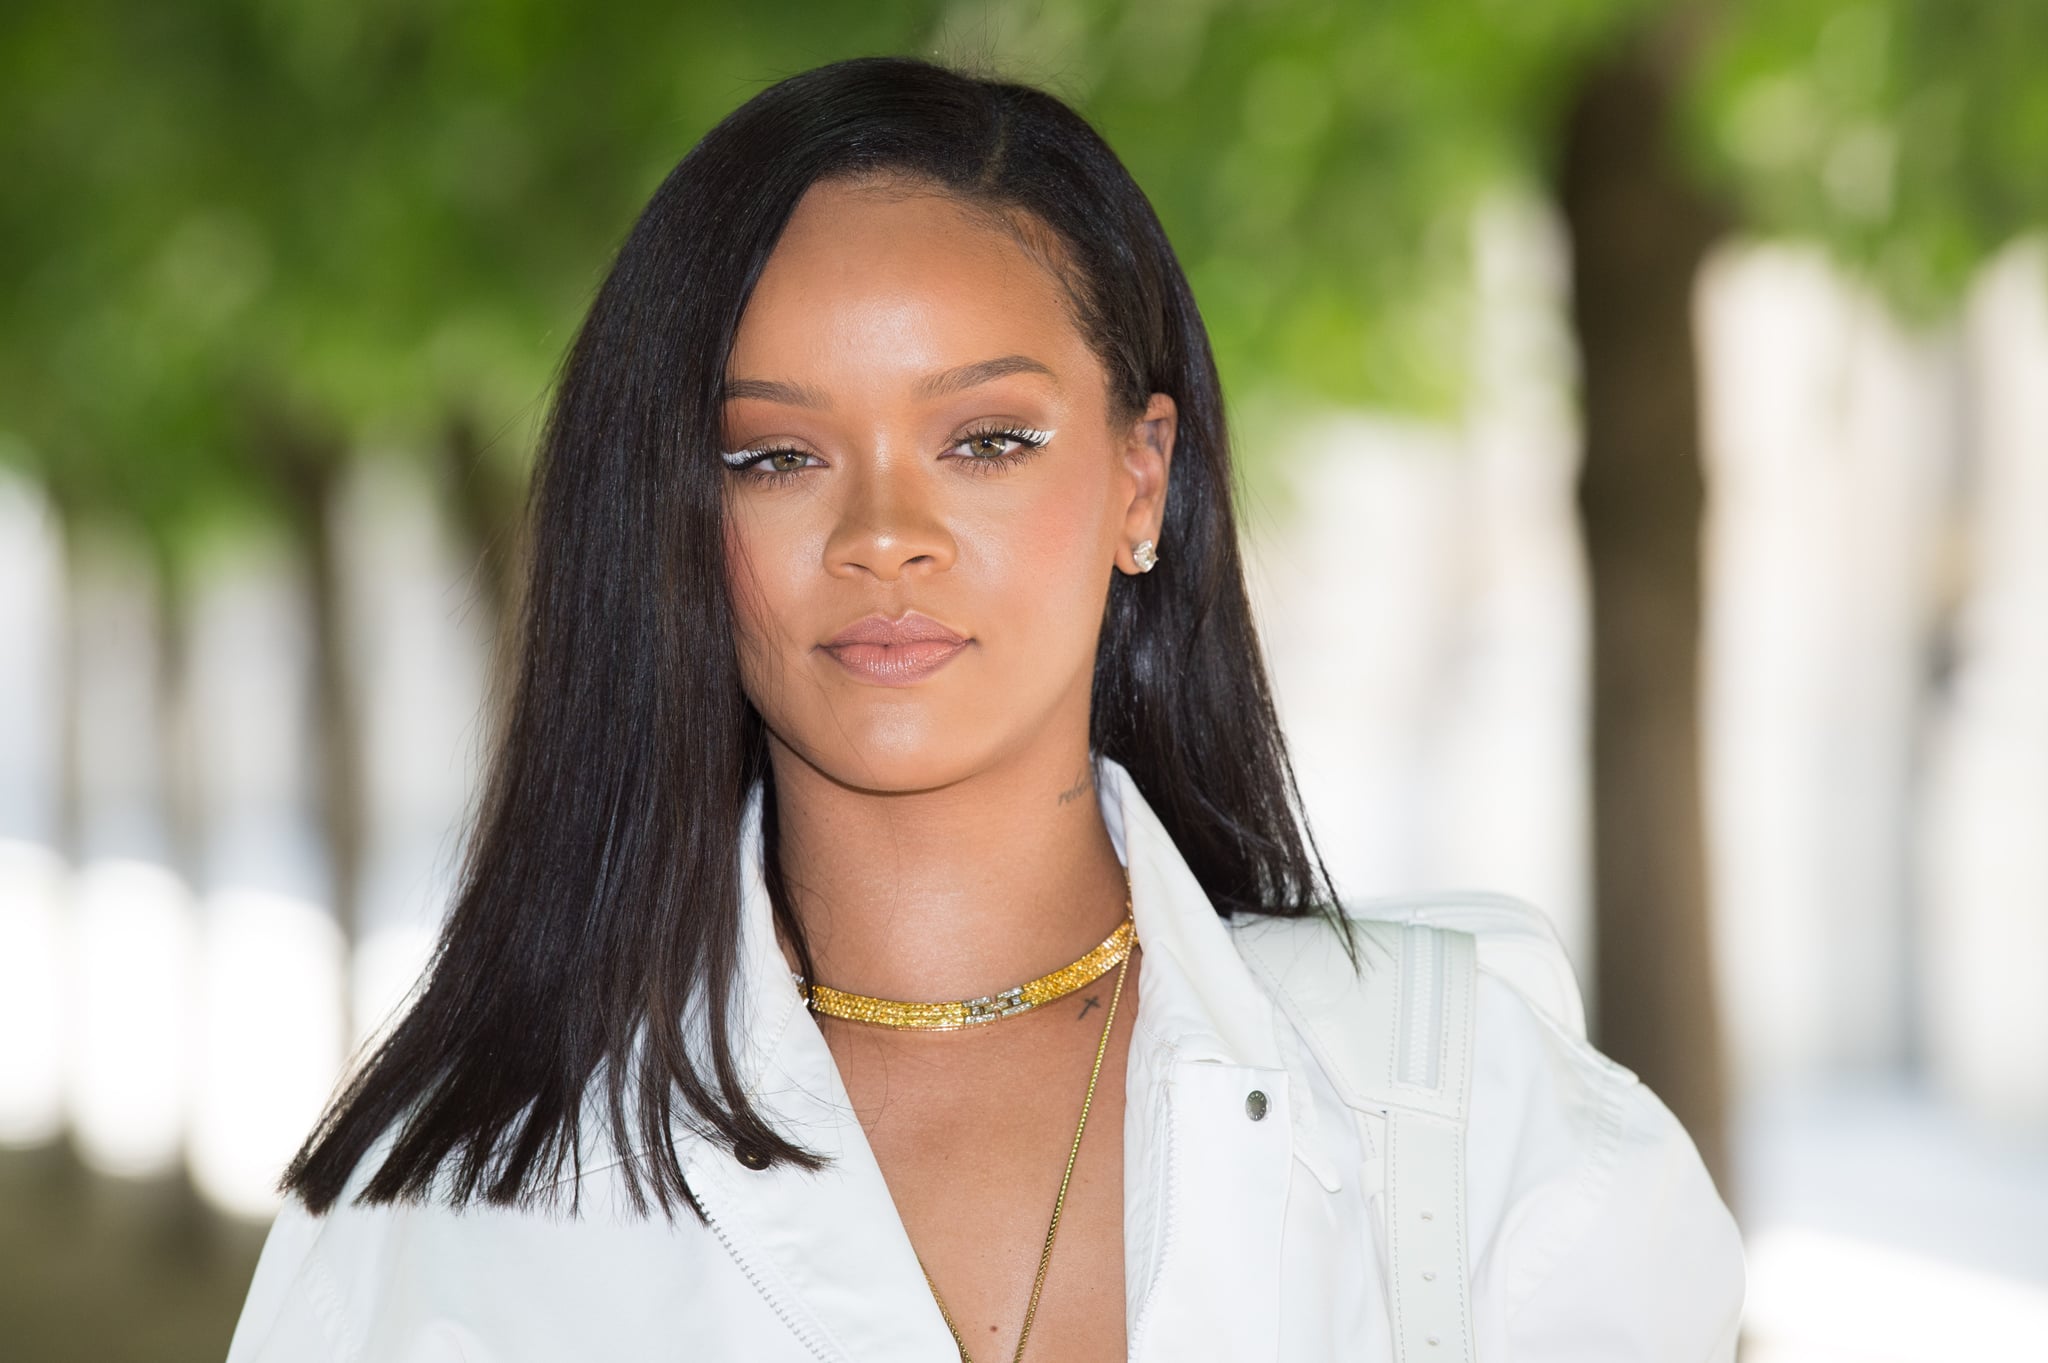 Rihanna Is a Vision in Peach at the Off-White Show in Paris